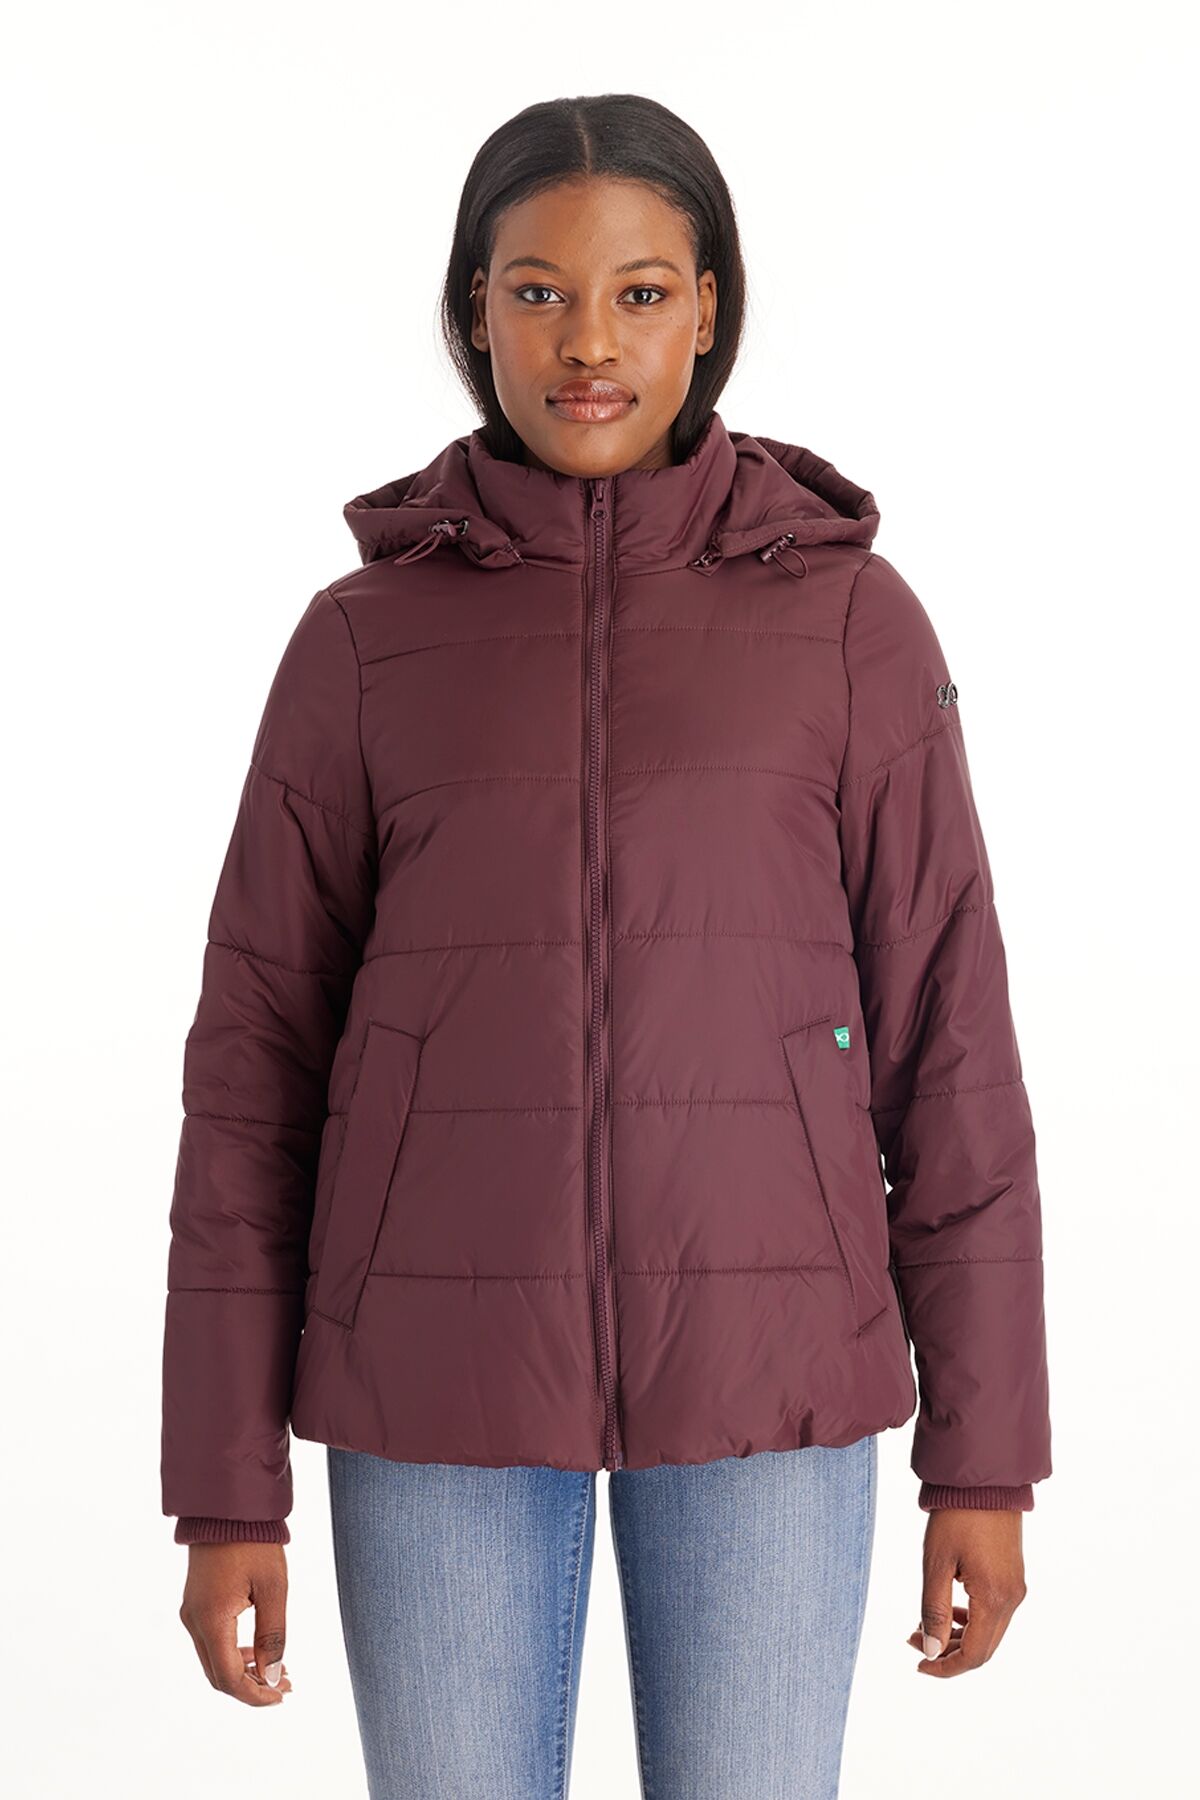 Modern Eternity Maternity Maternity Leia - 3in1 Bomber Puffer Jacket Quilted Hybrid - Burgundy